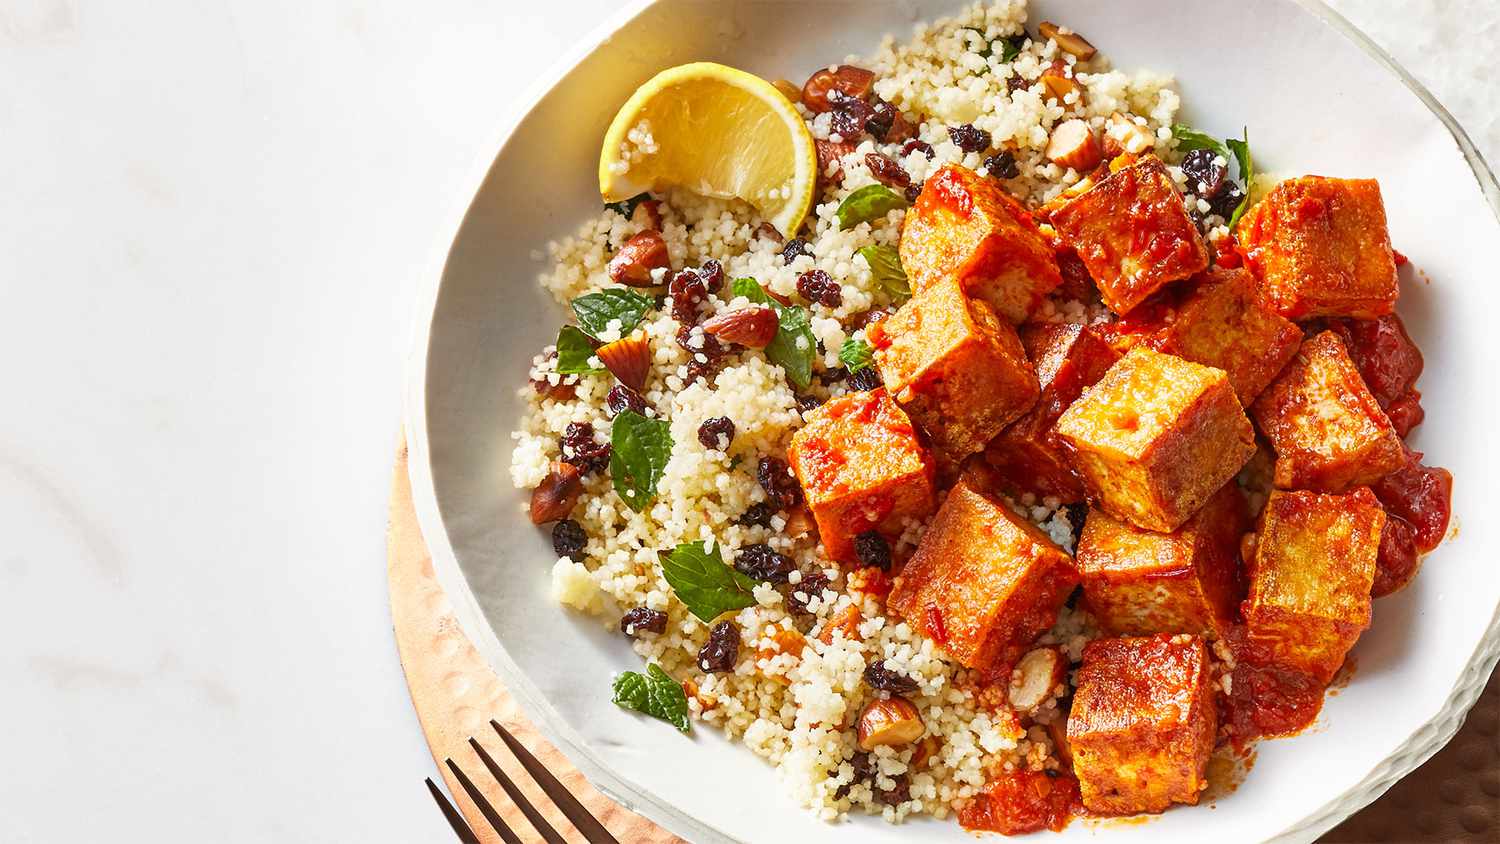 Spicy-Sweet Tofu With Couscous Recipe